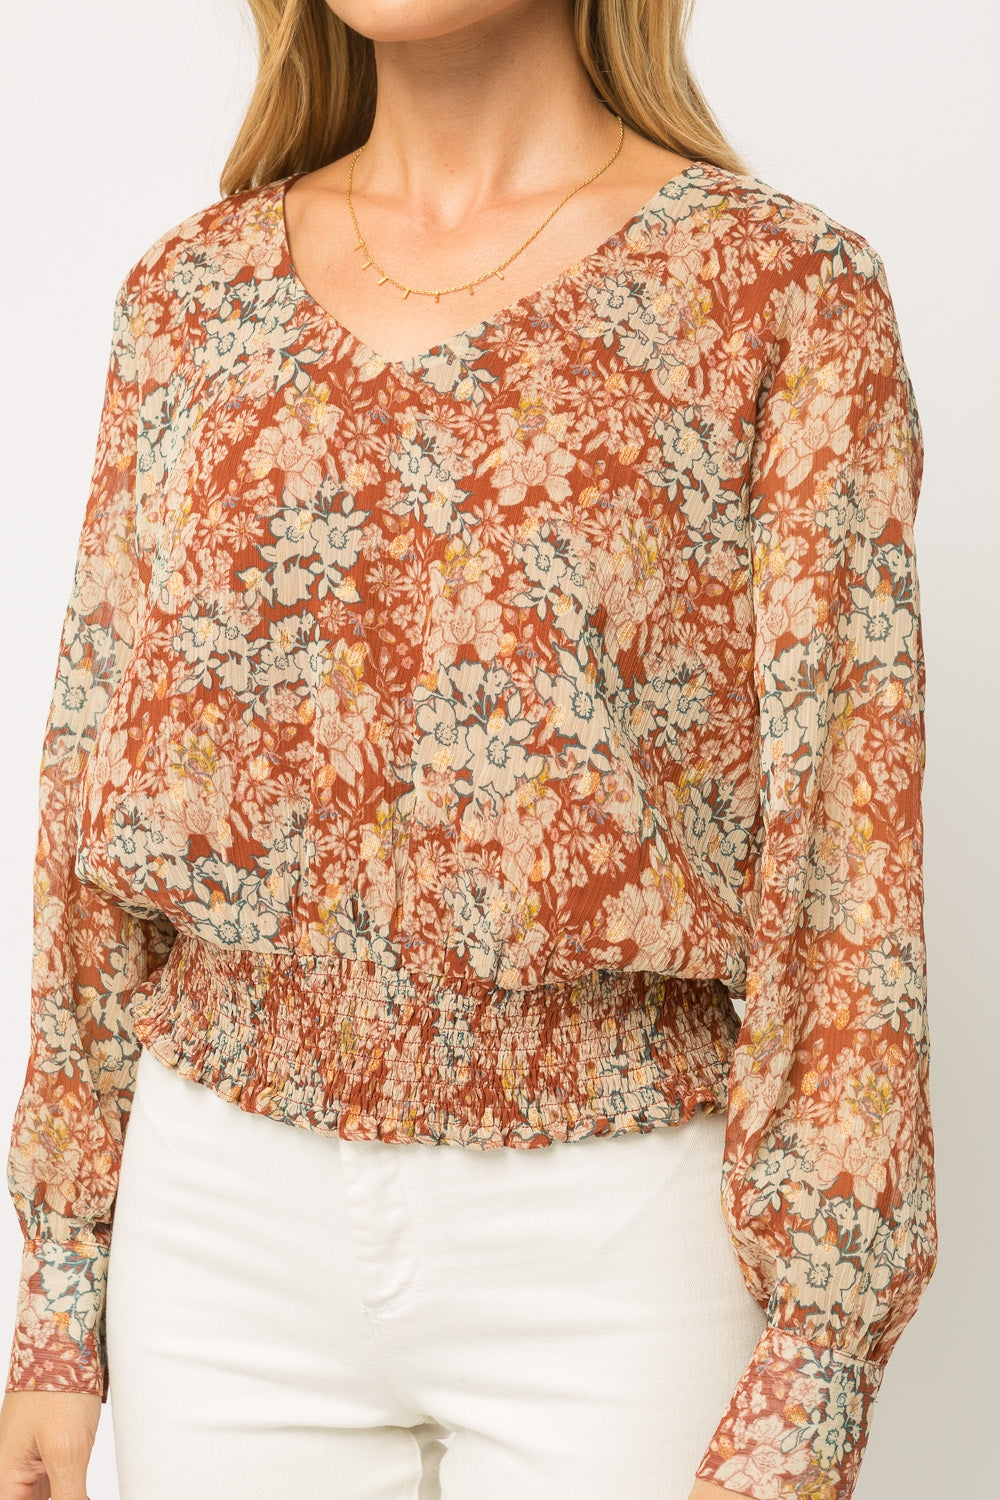 Floral Chiffon V-Neck Top - Wild Luxe Boutique